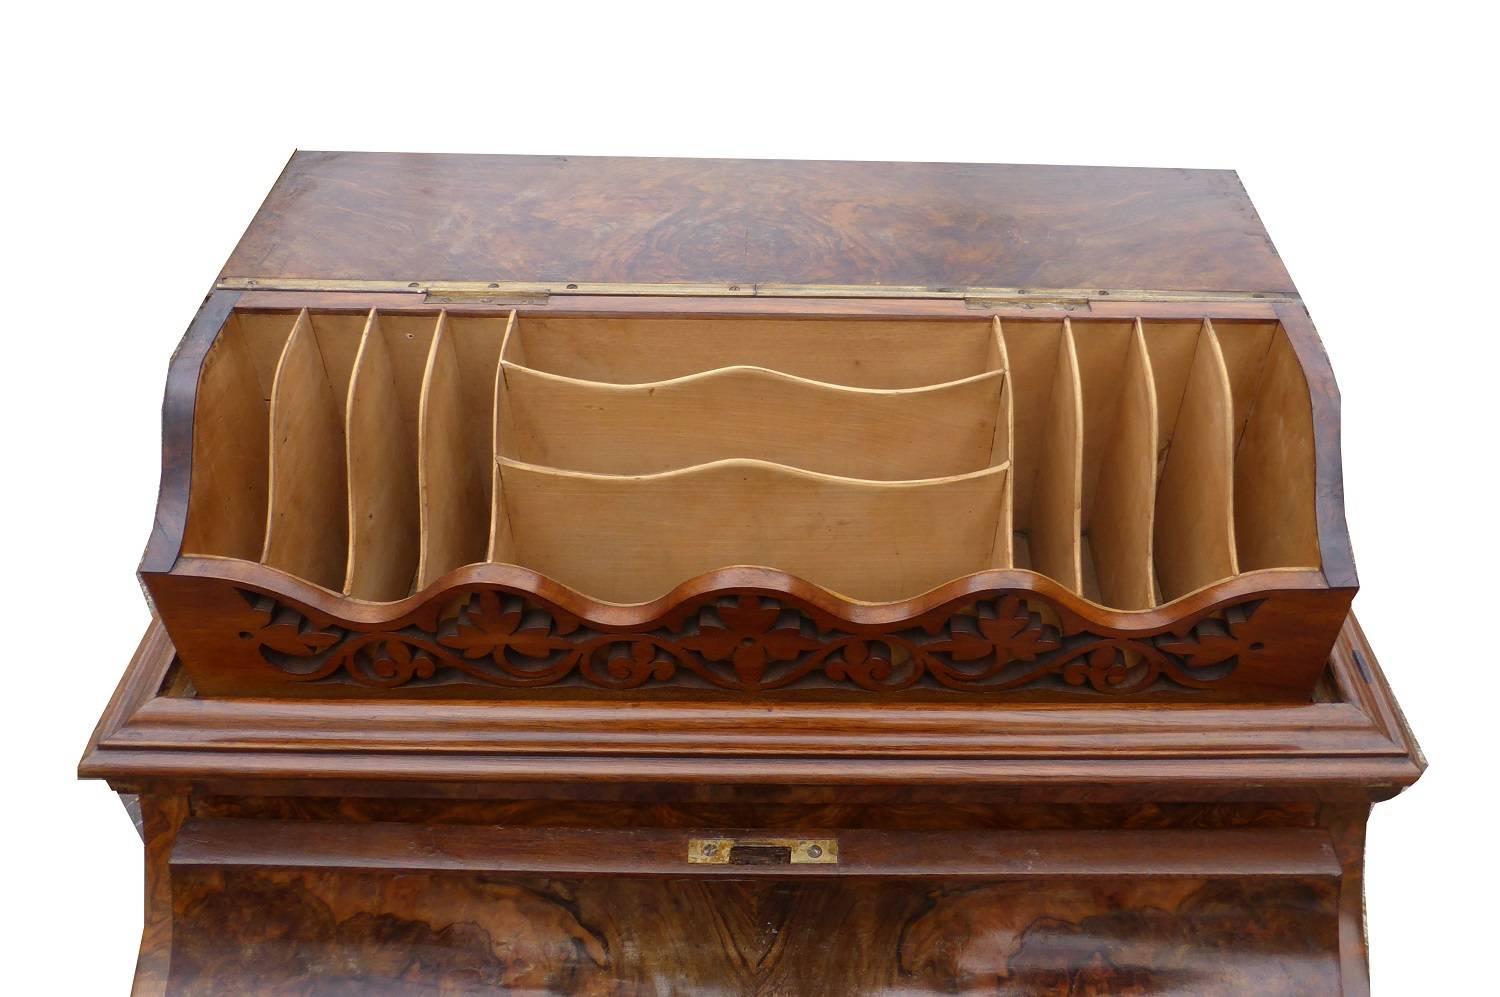 For sale is a fine quality Victorian burr walnut piano top pop up Davenport. The top of the Davenport has a fretted gallery on top of a hinged lid, opening to reveal a fitted interior for stationary etc. Below this is the 